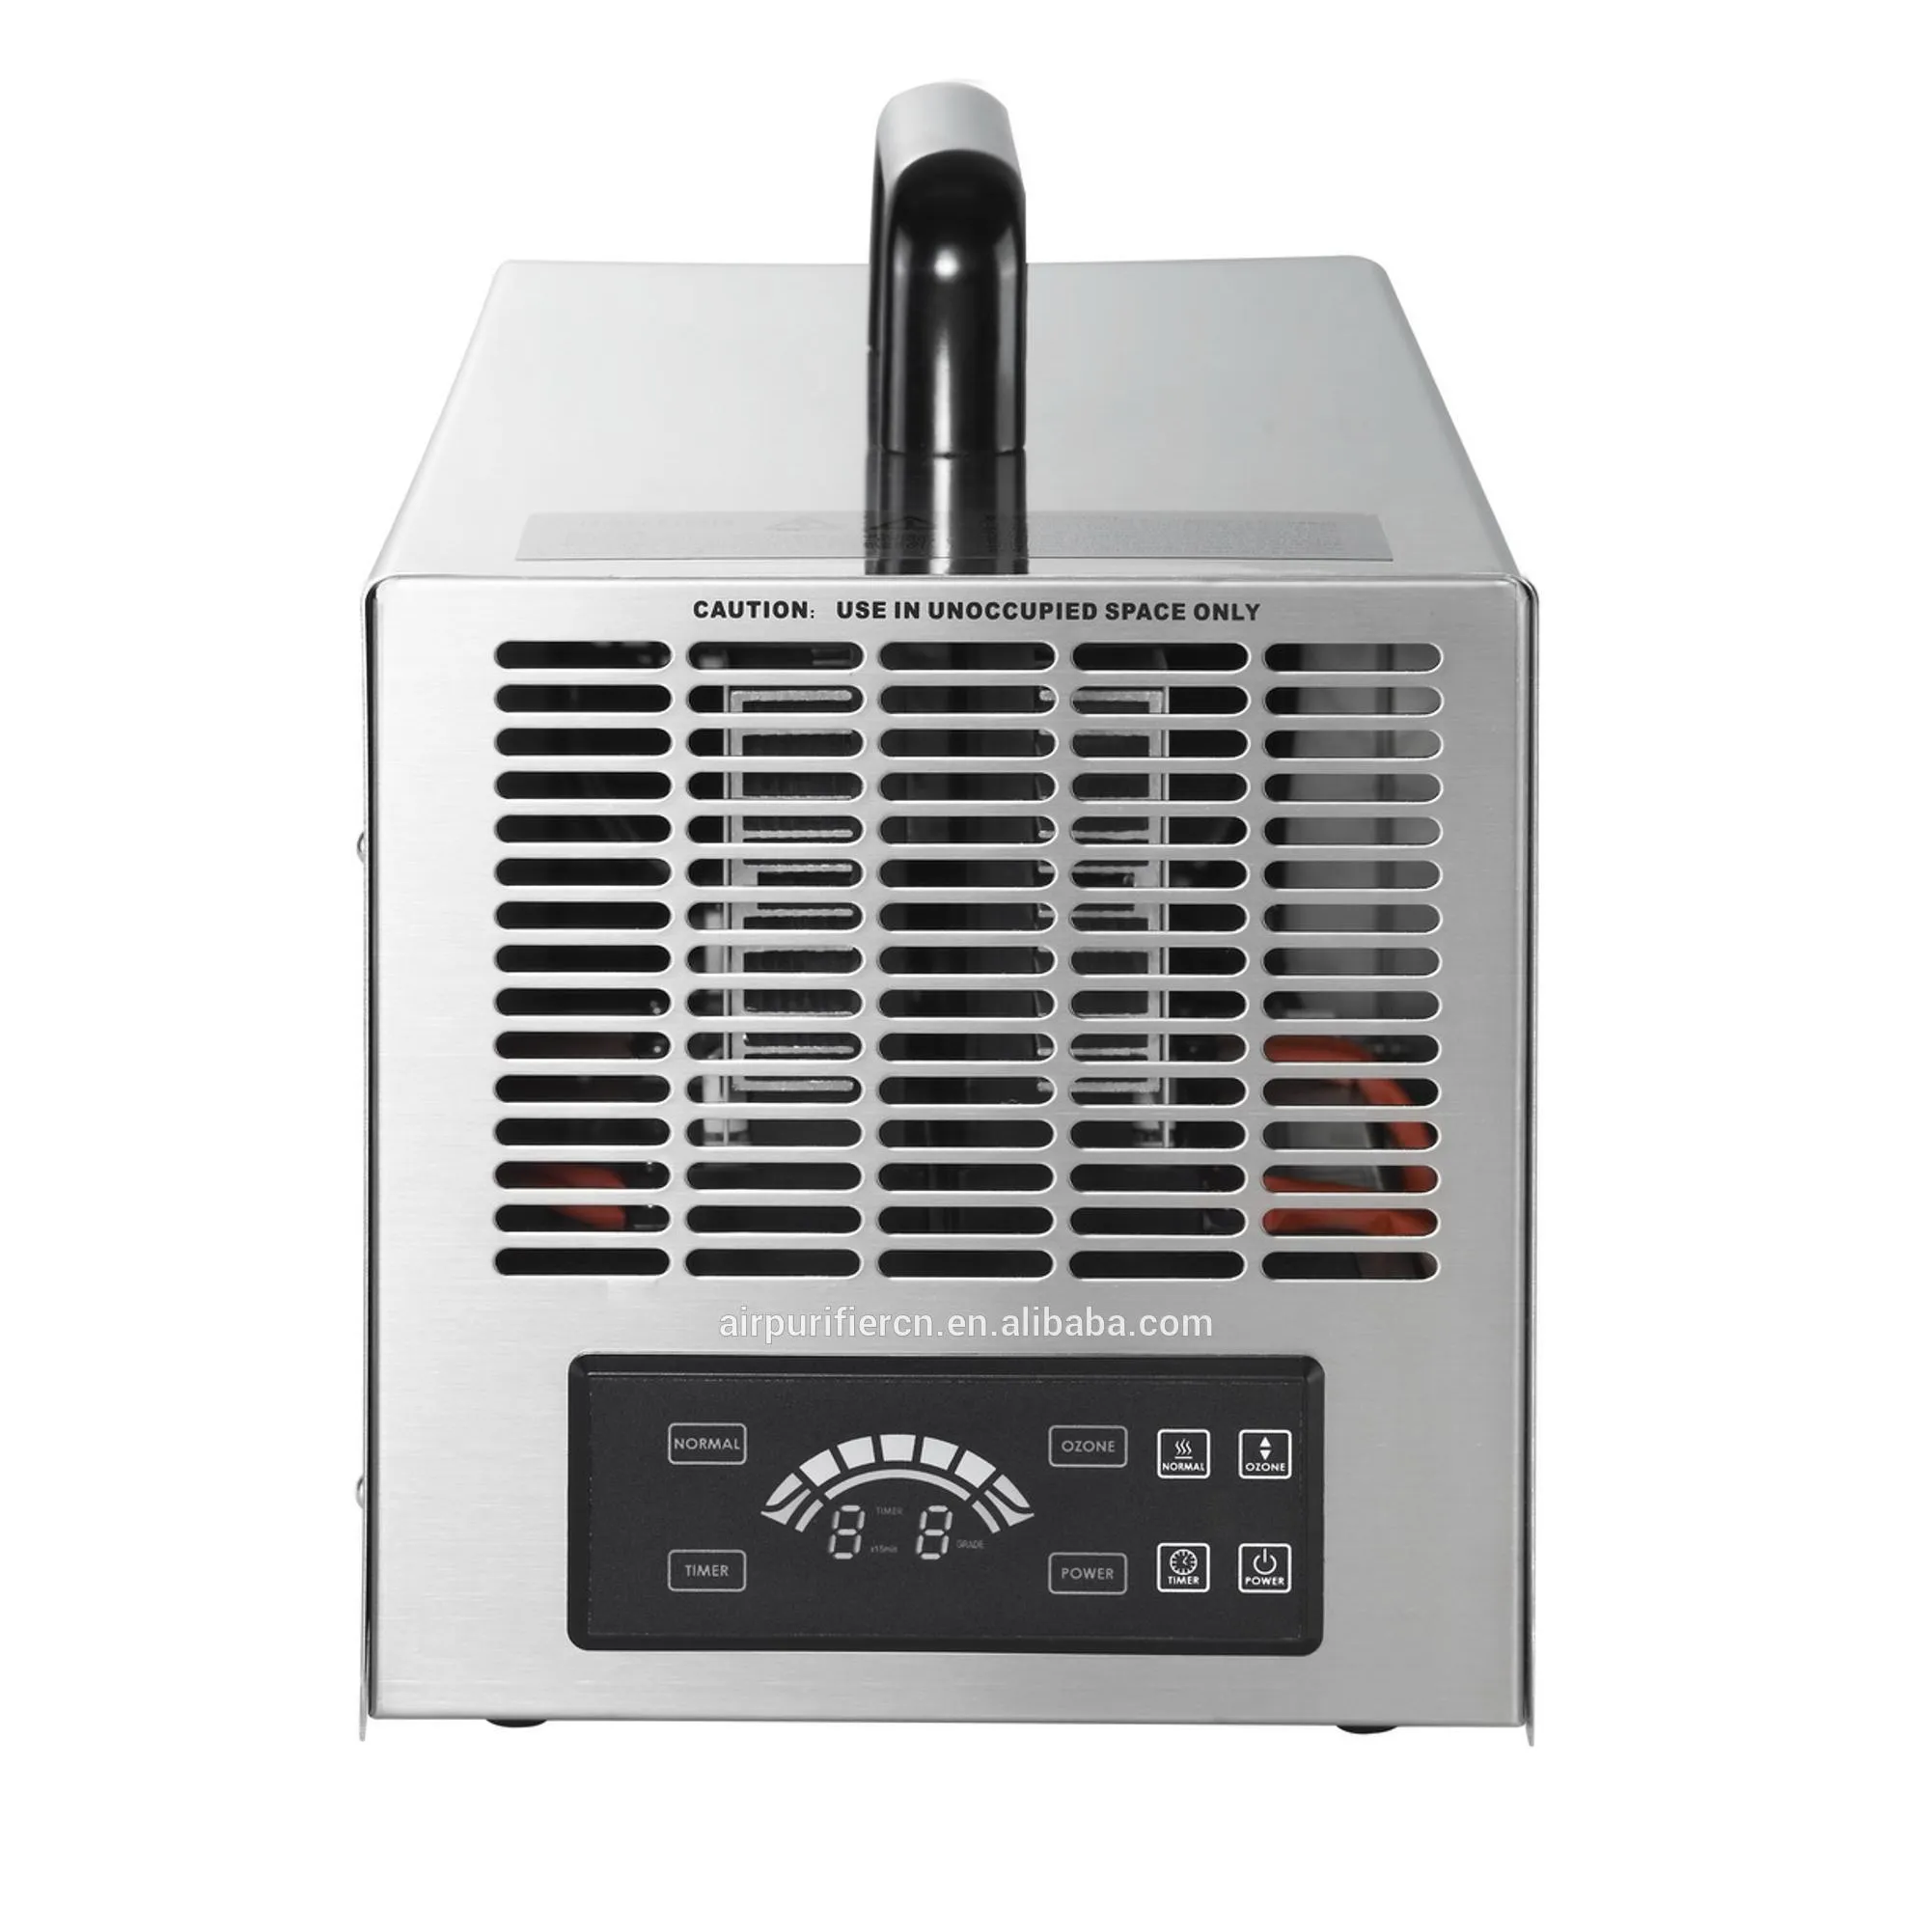 HIHAP brand commercial industrial ozone generator 28g heavy concentration O3 sterilizing machine with remote control